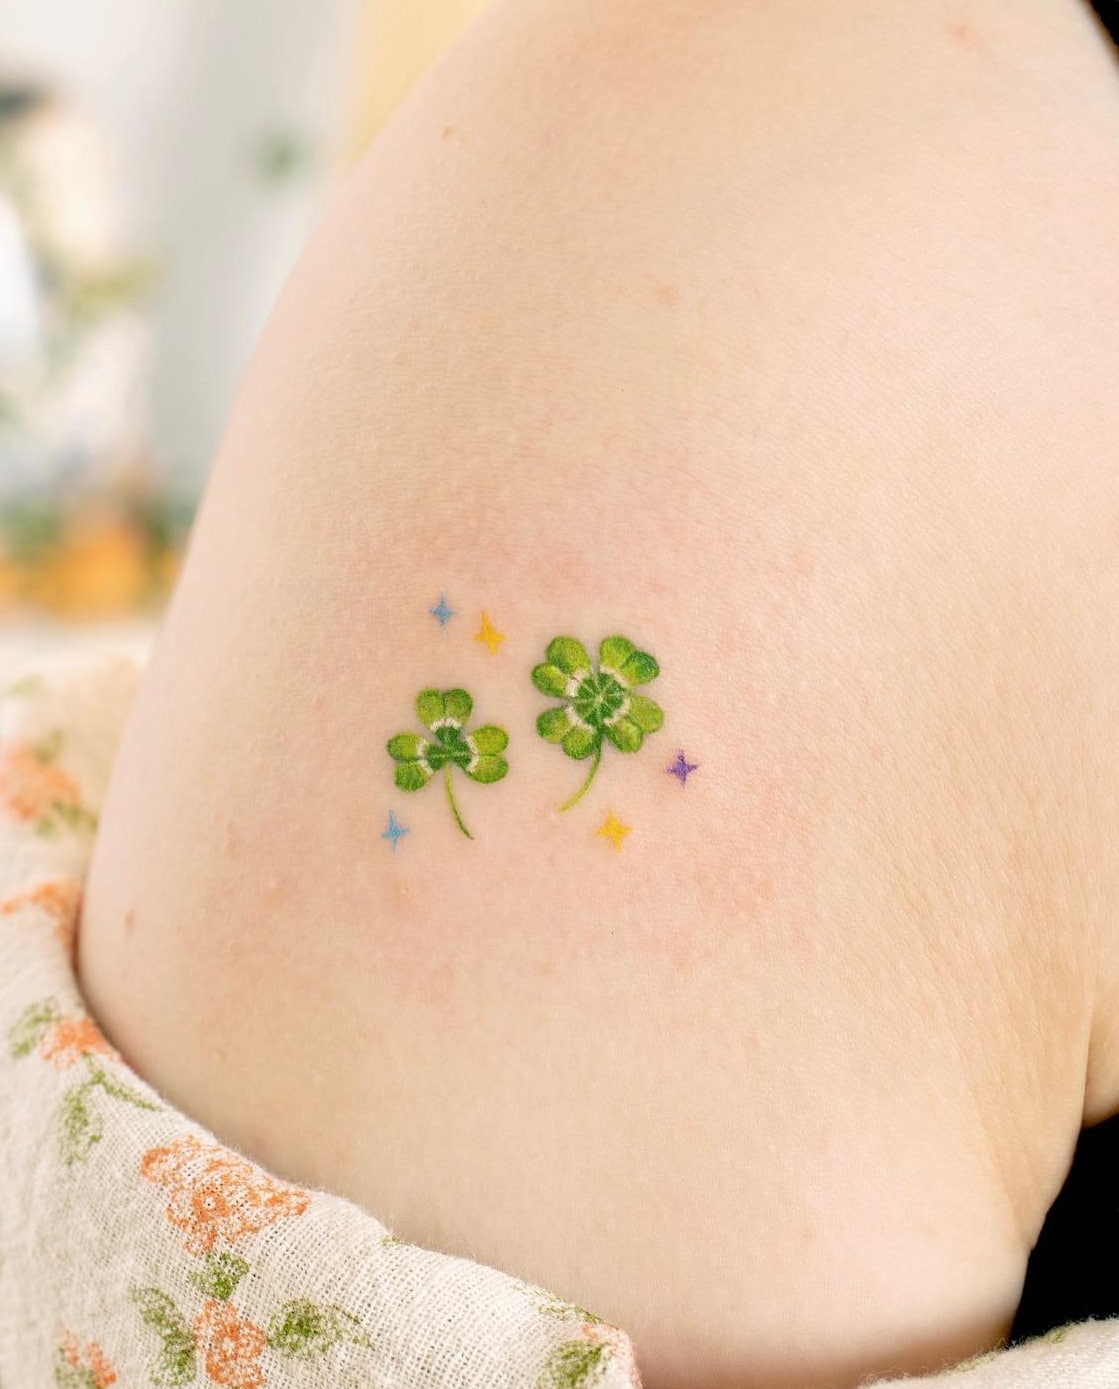 What does a four leaf clover tattoo symbolize